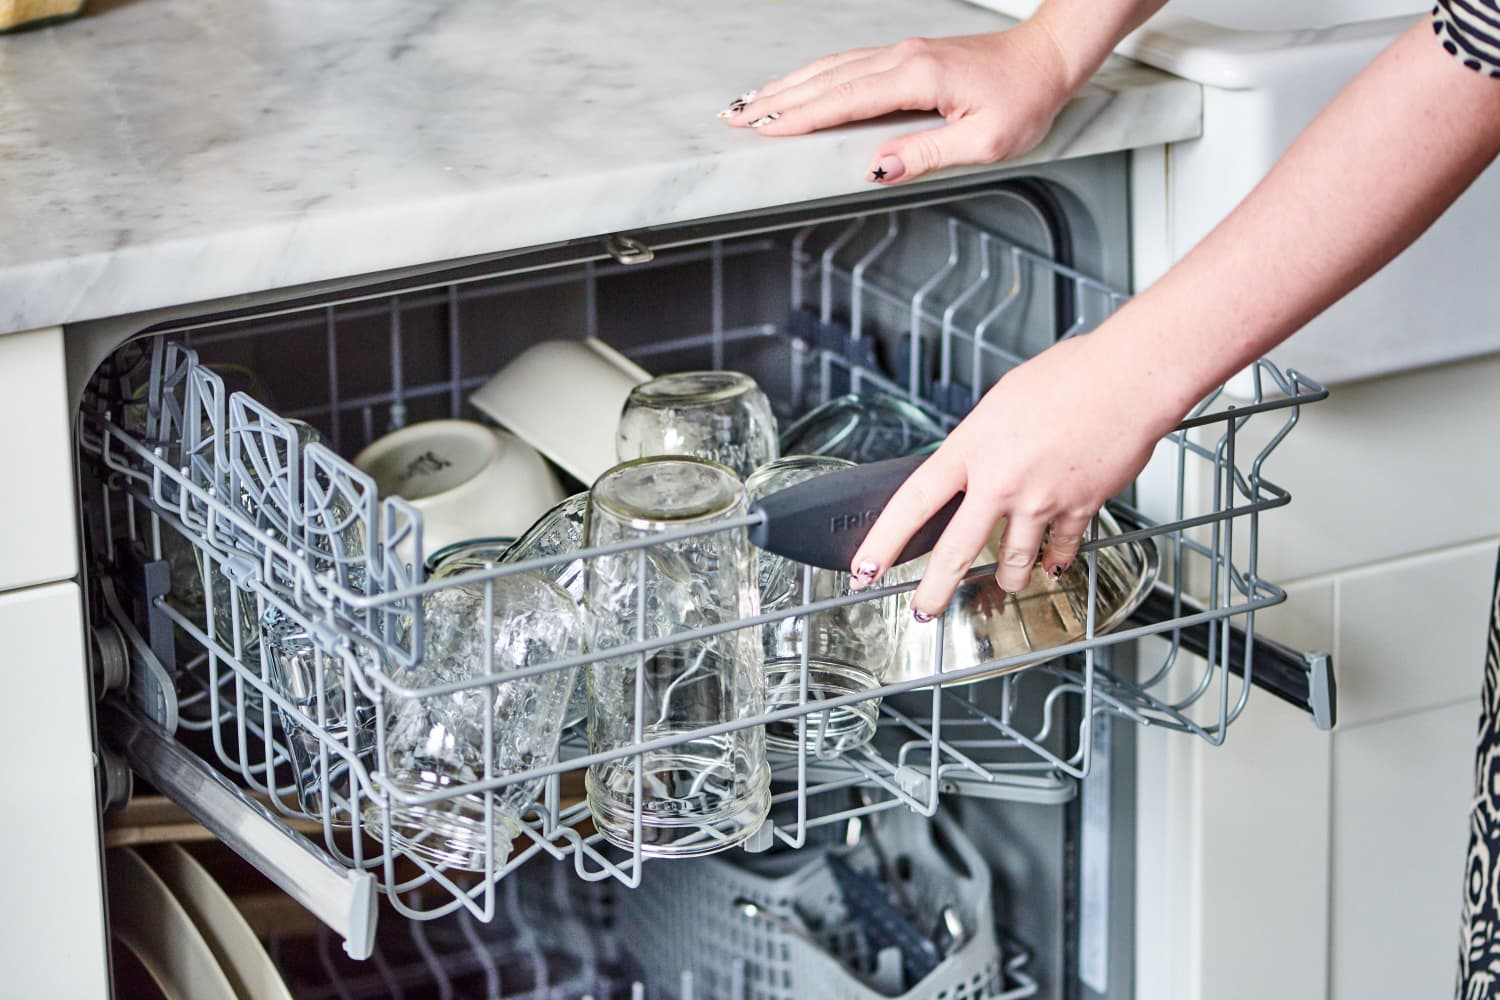 The Truth About Rental Dishwashers, According to Real Estate Agents